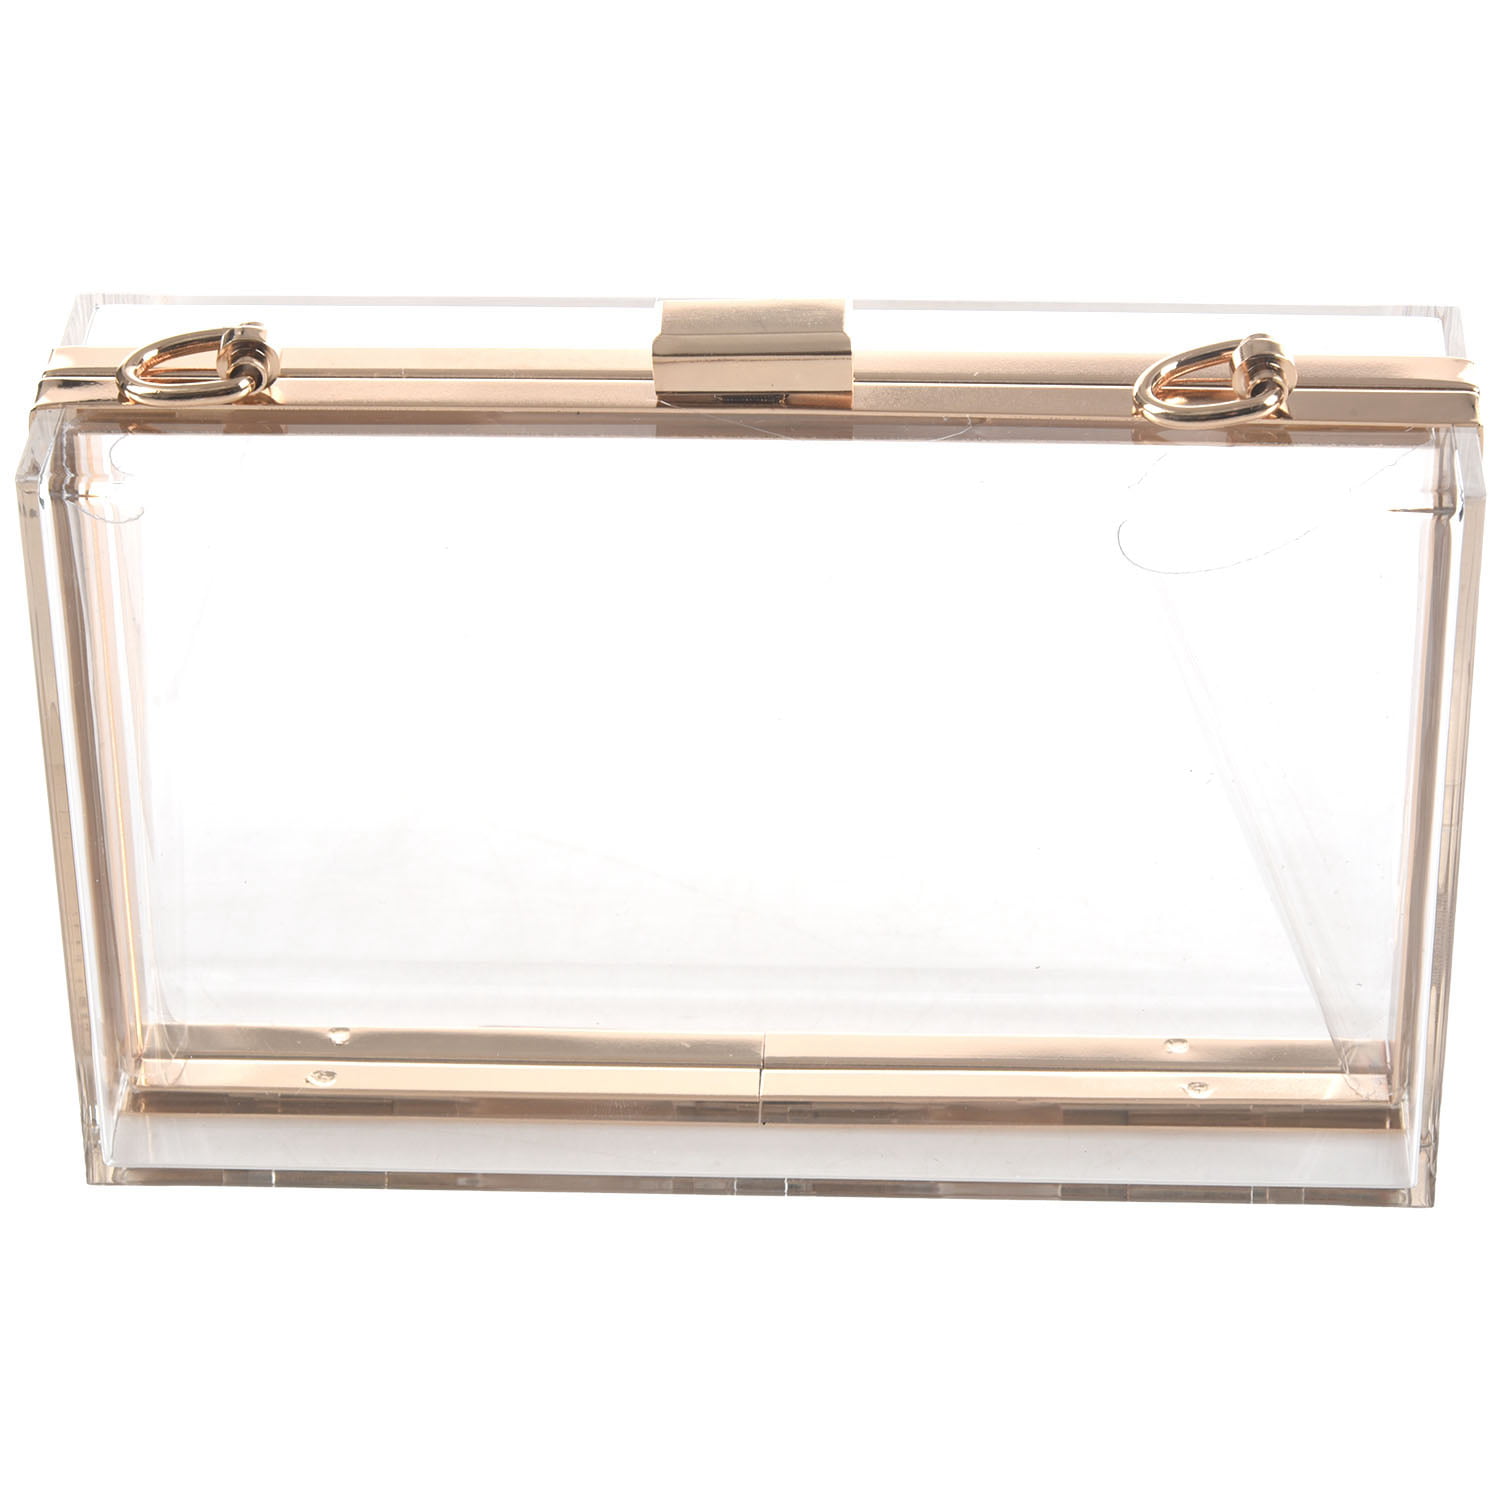 Women Cute Clear Acrylic Box Clutch Bag Transparent Approved